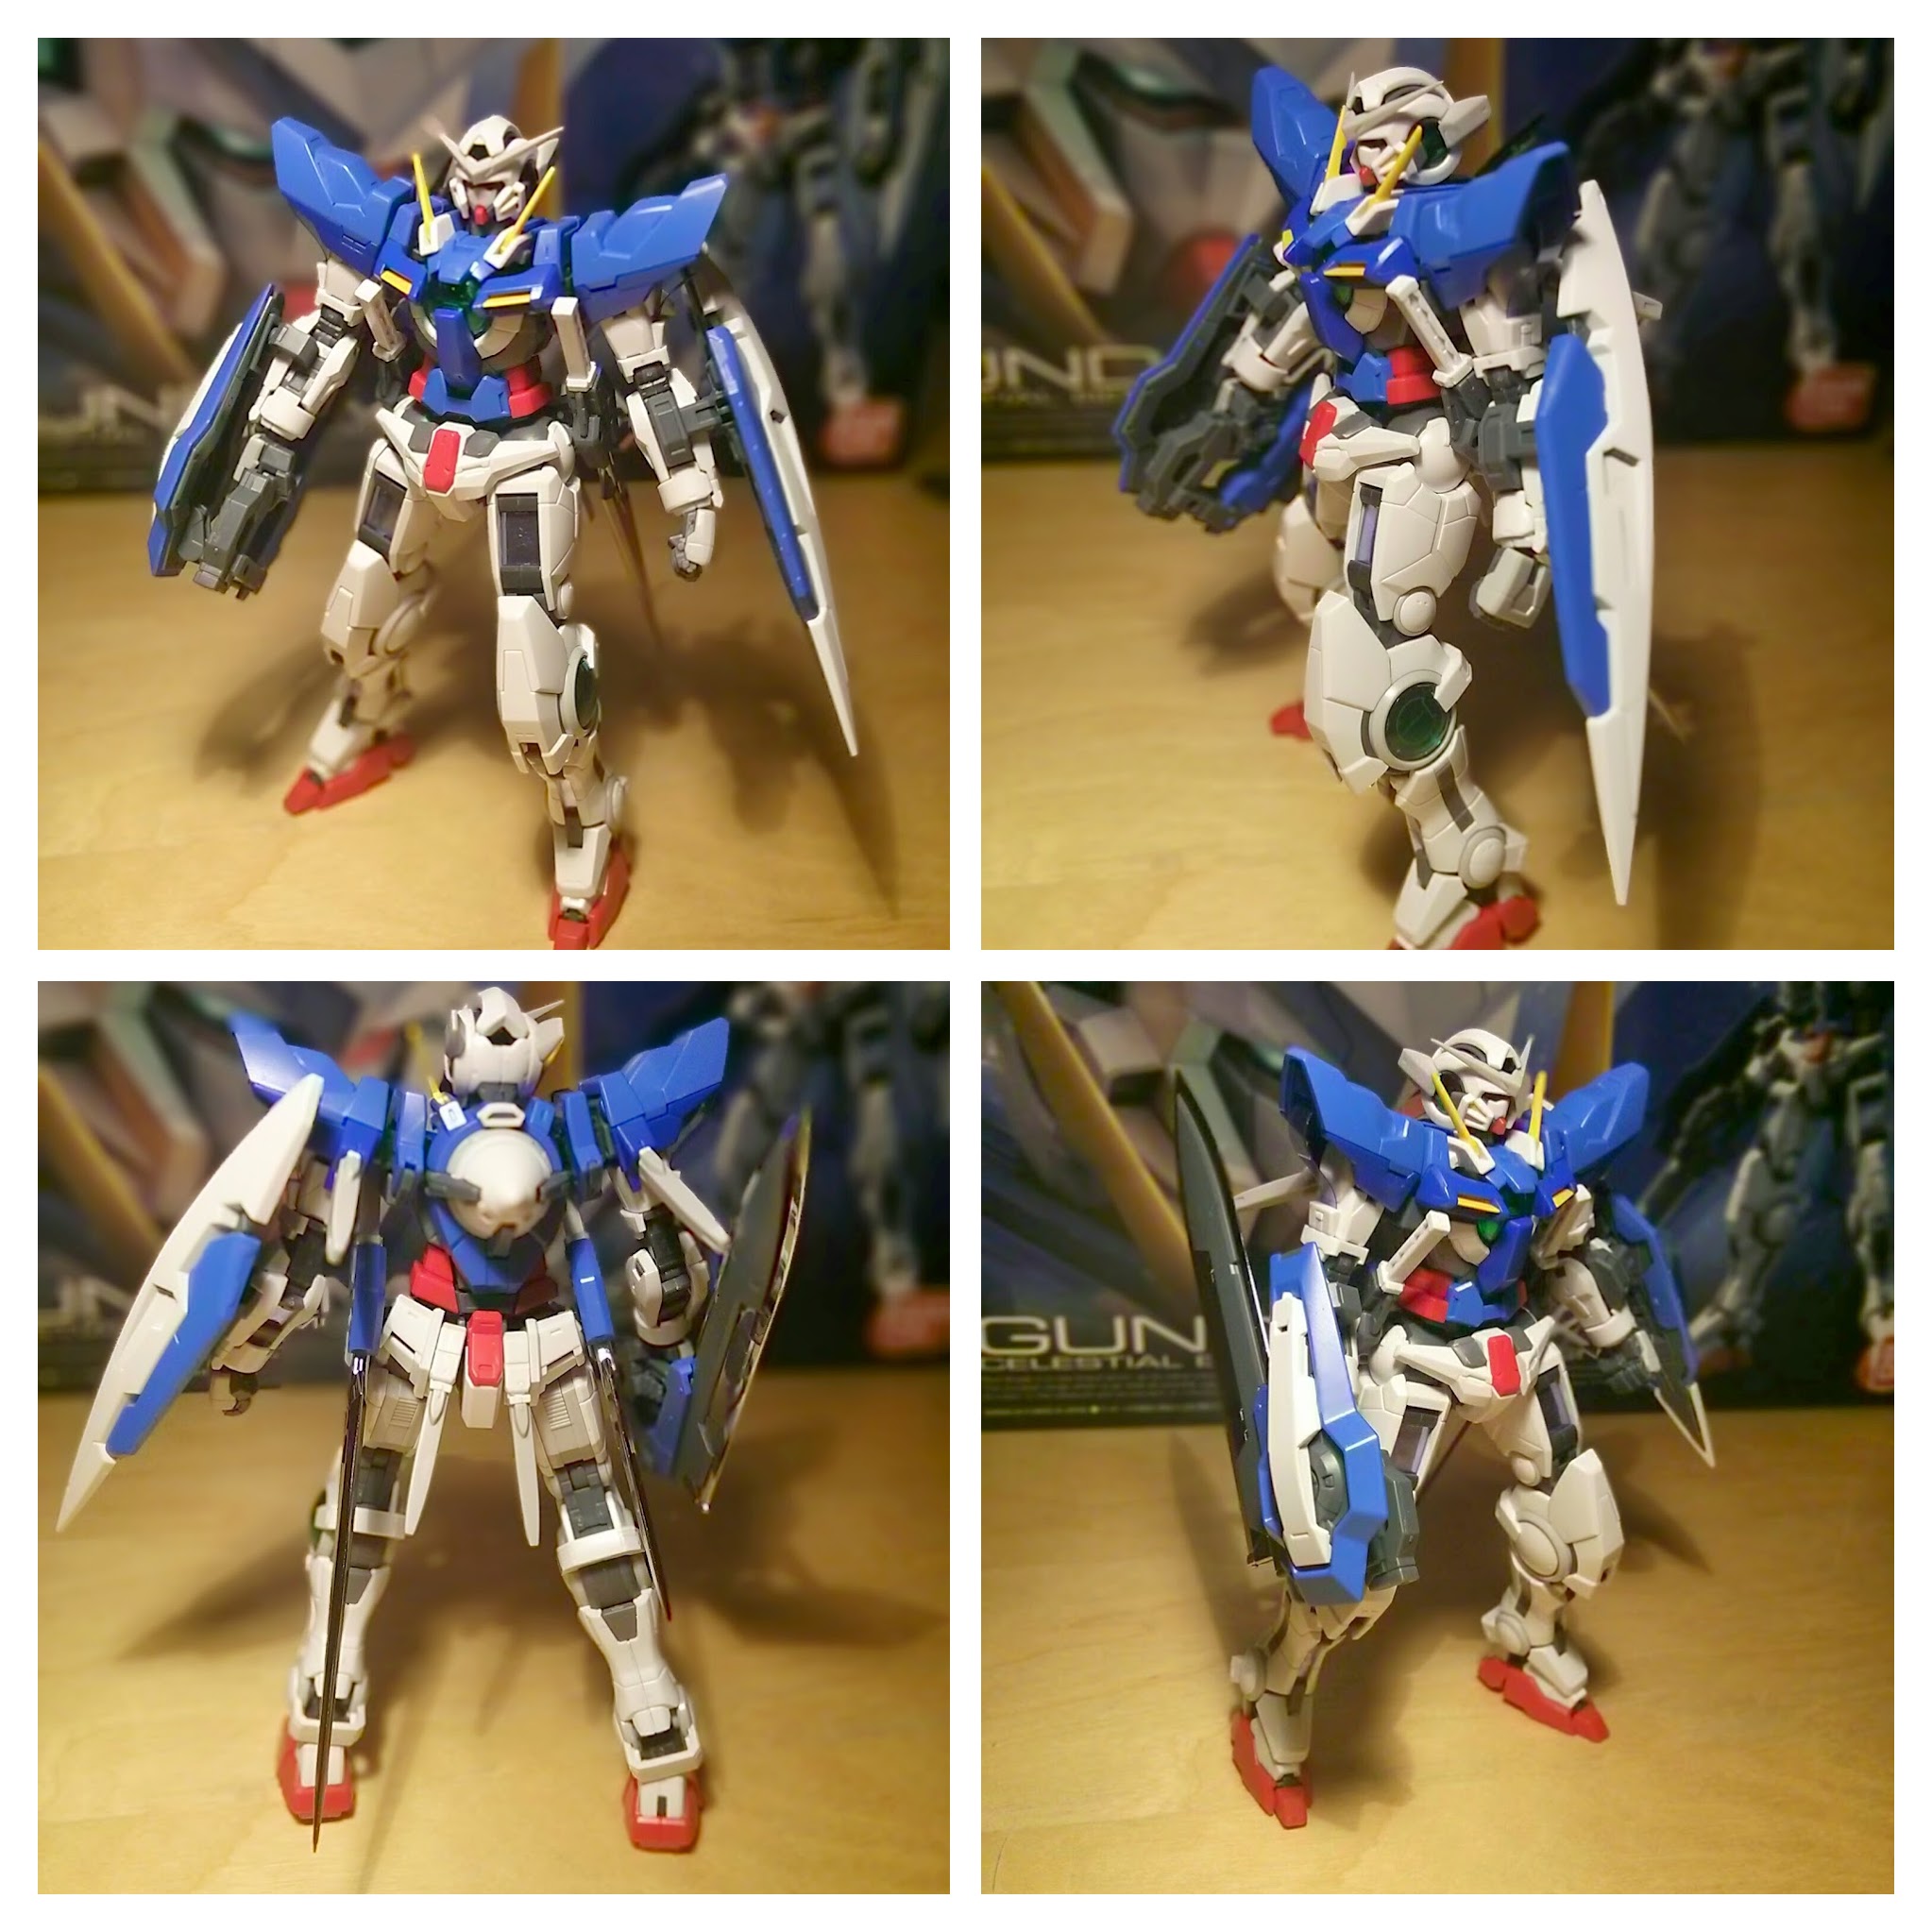 RG kit, without any stickers